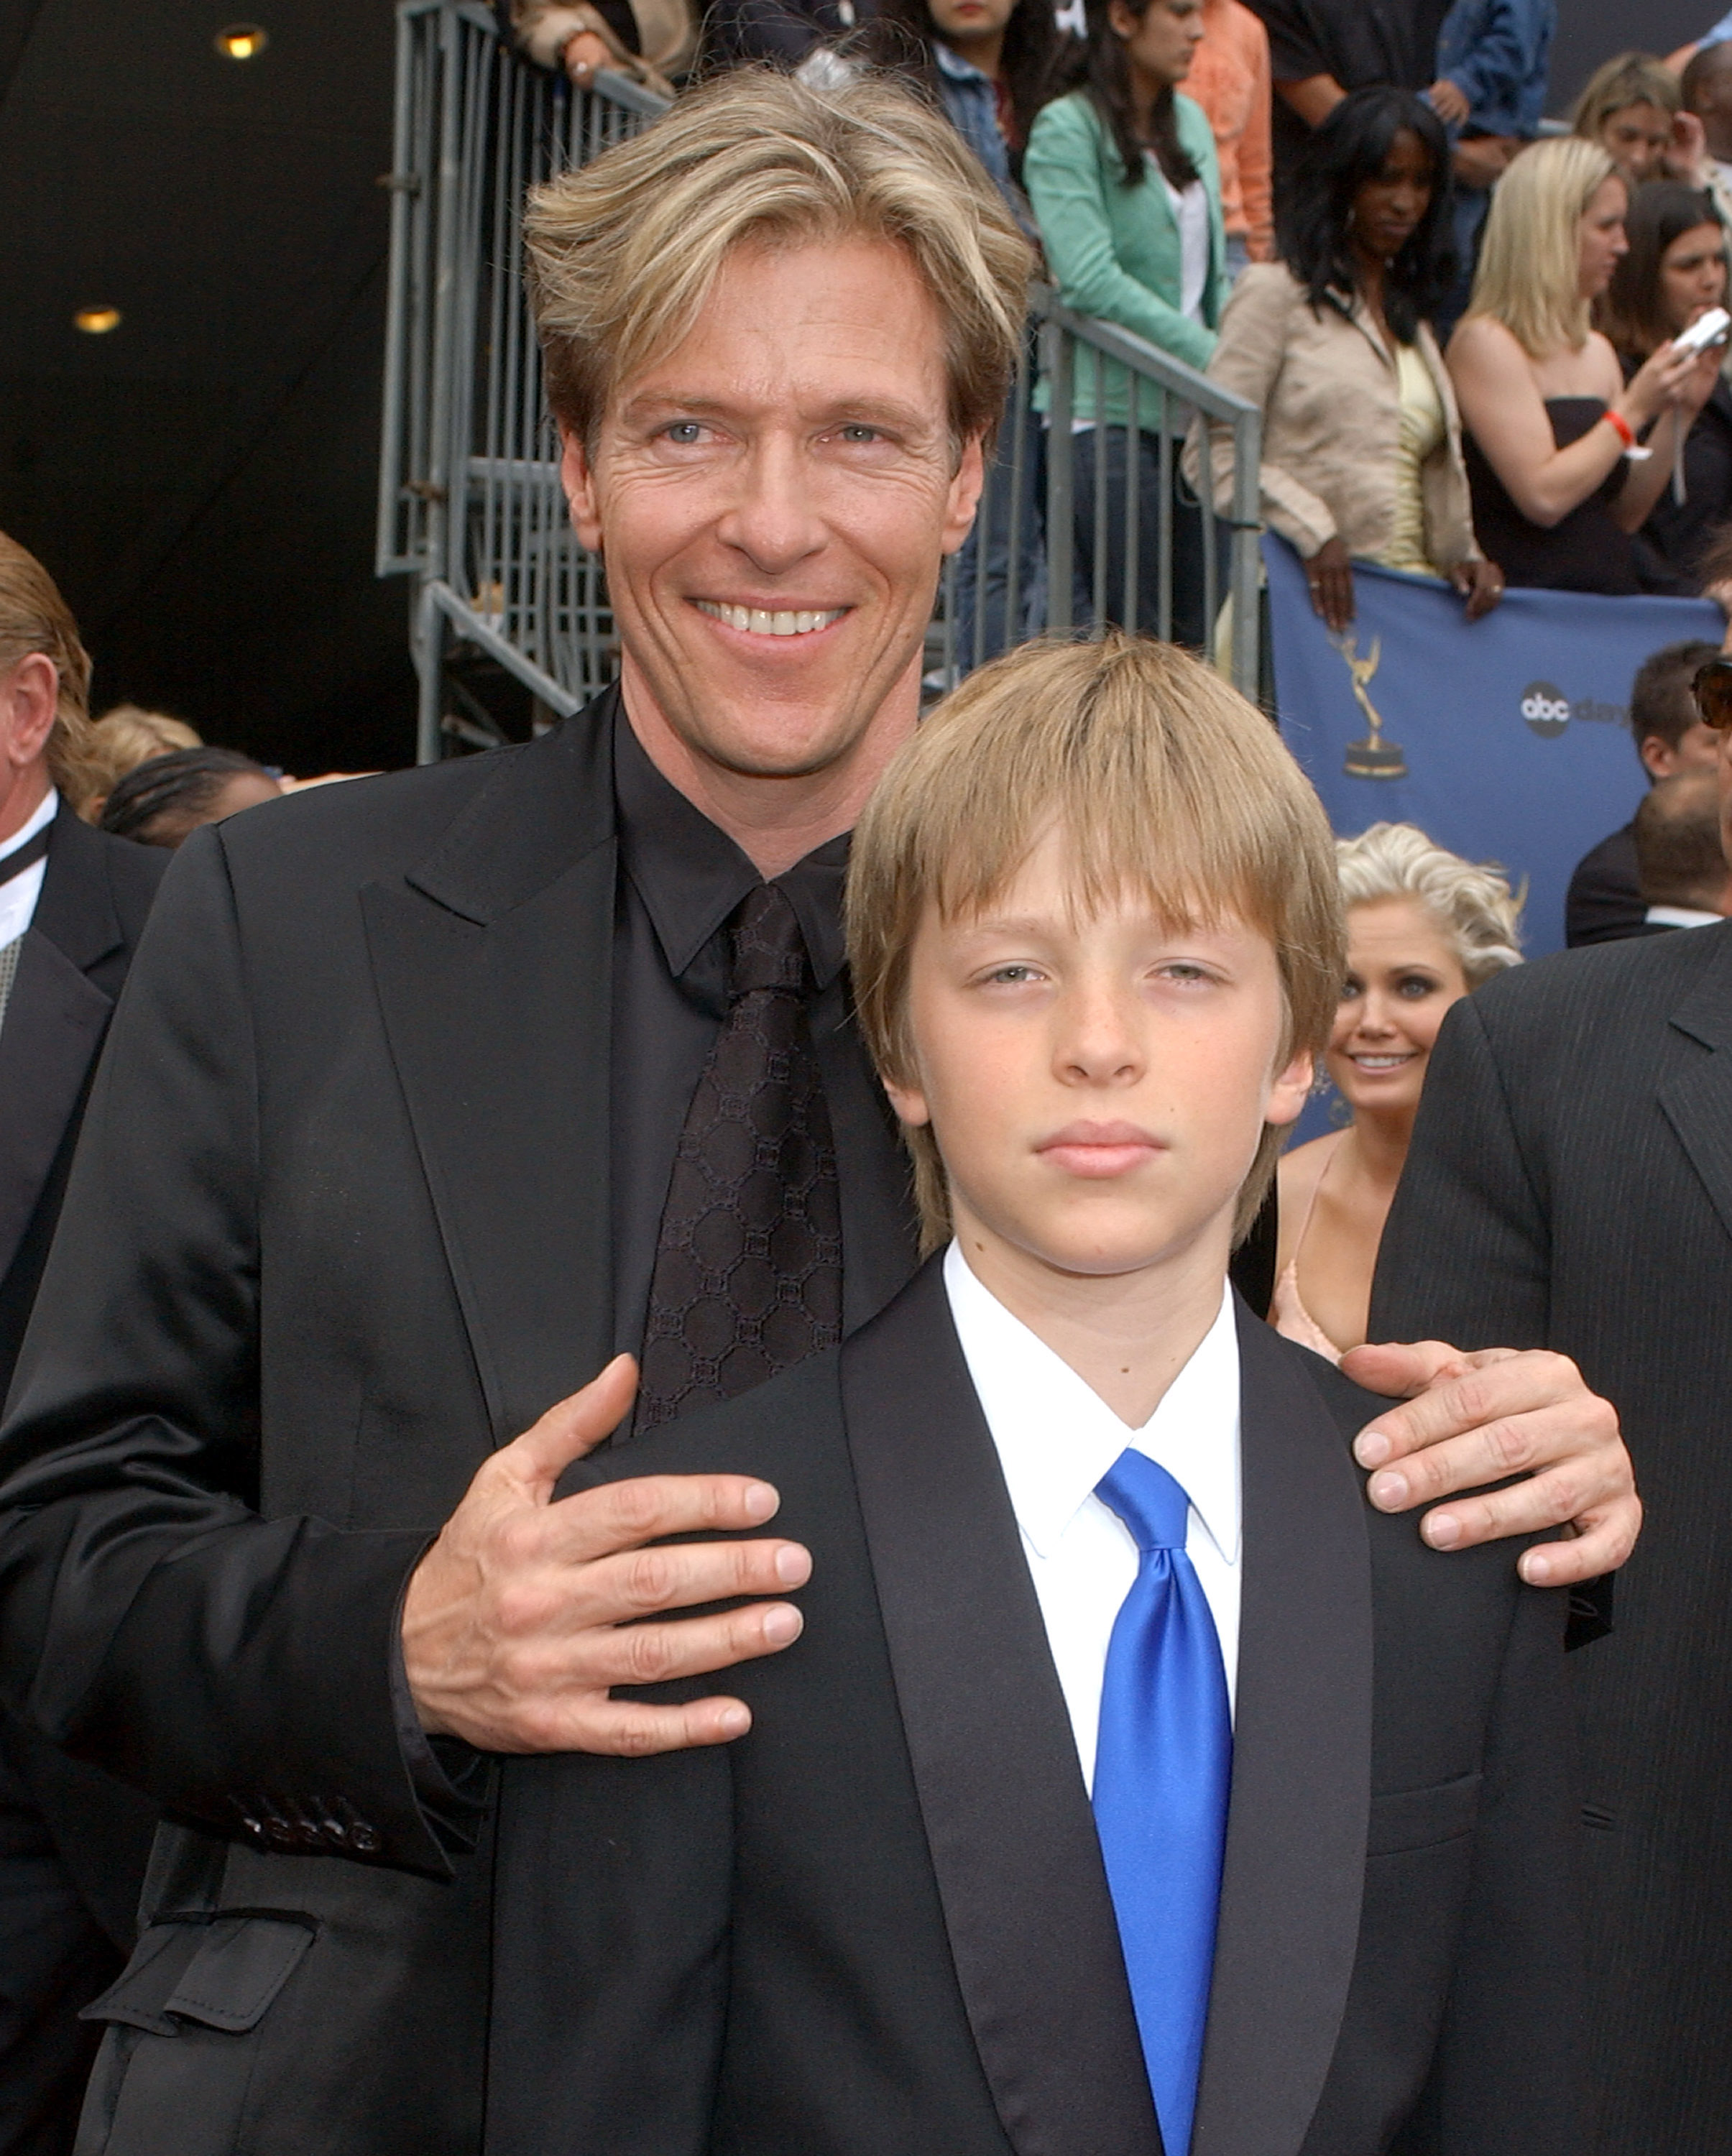 Jack Wagner and son in Hollywood, California on April 28, 2006 | Source: Getty Images 